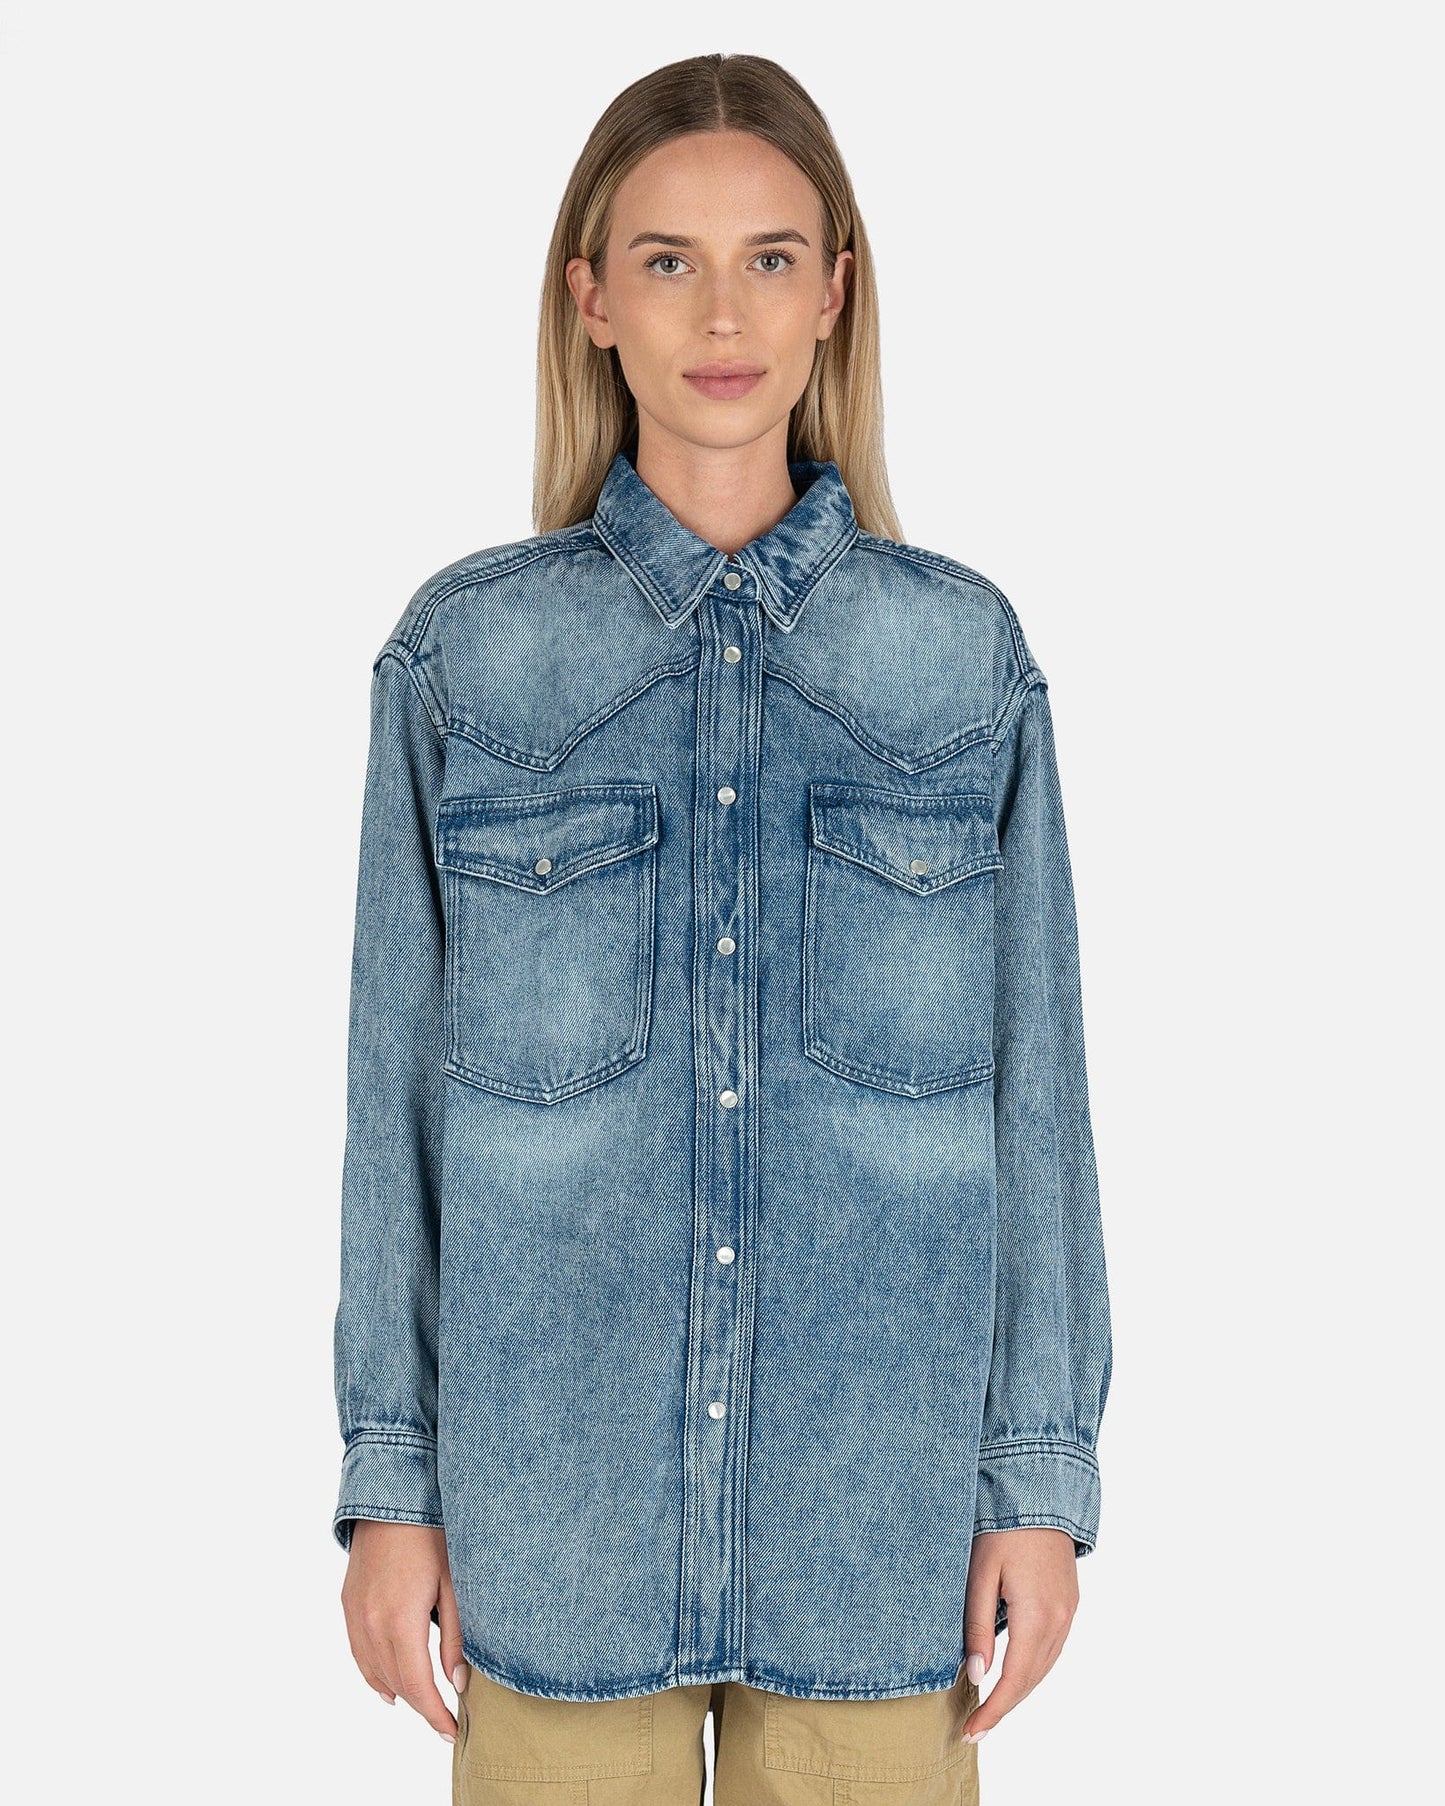 Isabel Marant Etoile Women Tops Taniami Button Down Shirt in Light Blue